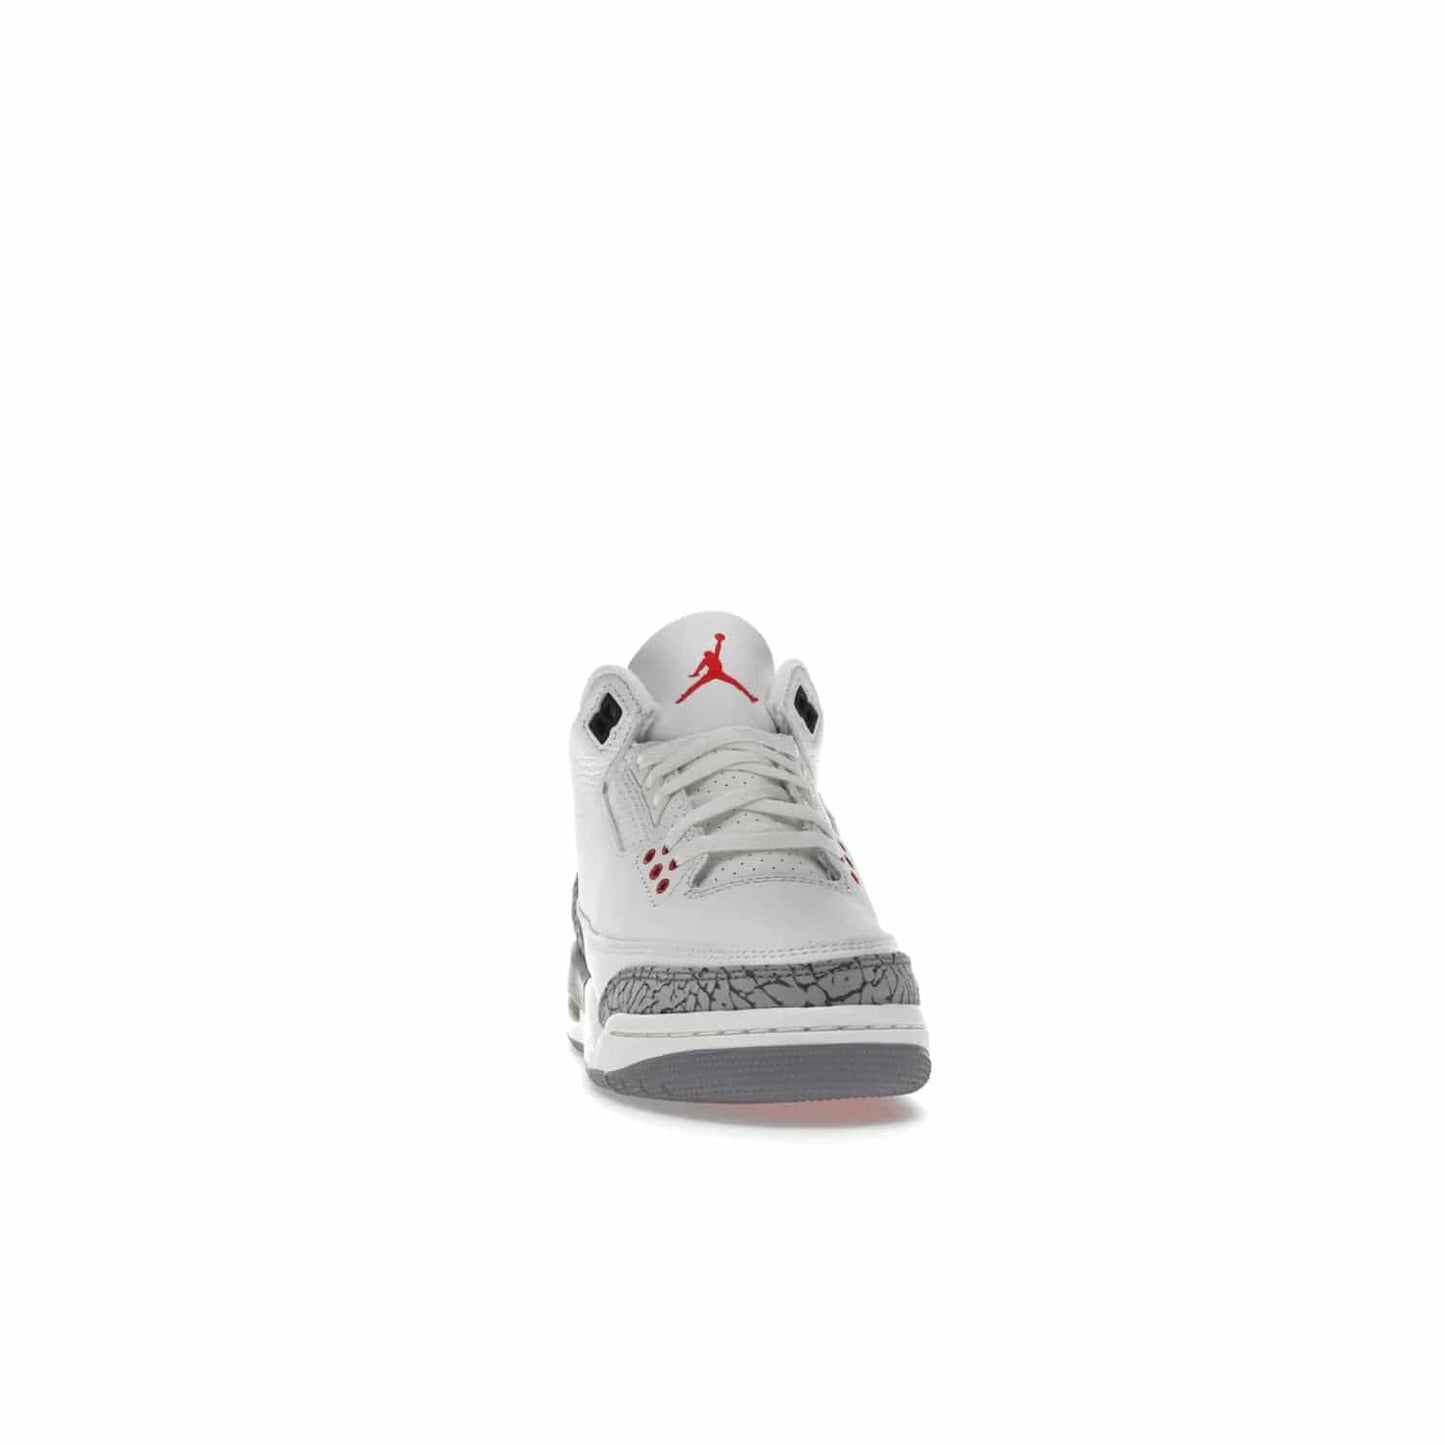 Jordan 3 Retro White Cement Reimagined (GS) - Image 9 - Only at www.BallersClubKickz.com - Grab the perfect blend of modern design and classic style with the Jordan 3 Retro White Cement Reimagined (GS). Features Summit White, Fire Red, Black, and Cement Grey colorway, iconic Jordan logo embroidered on the tongue, and “Nike Air” branding. Limited availability, get your pair before March 11th 2023.